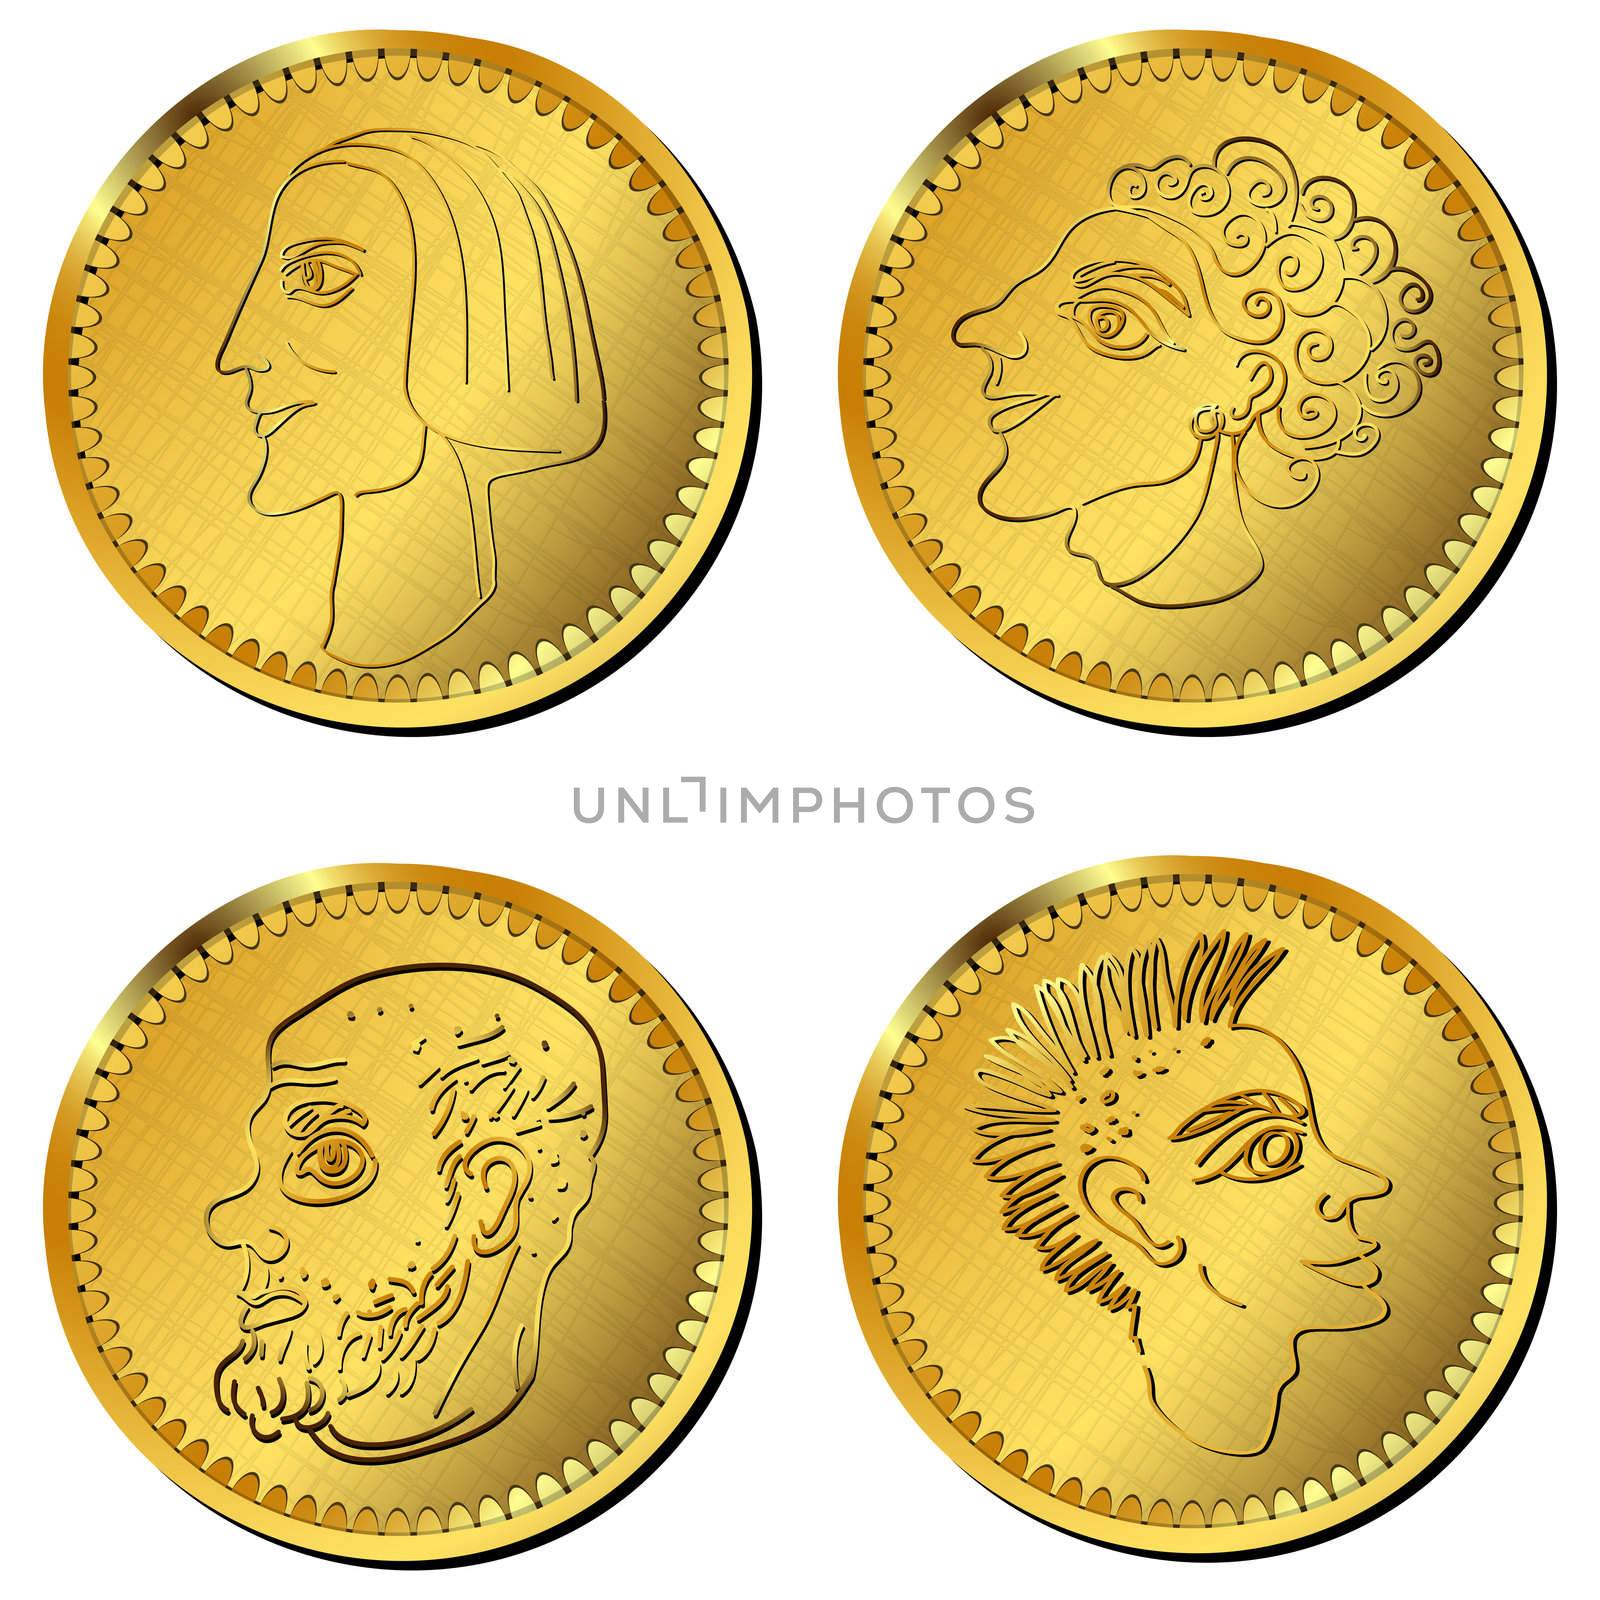 Greek or roman, coins with stylized characters, isolated objects over white